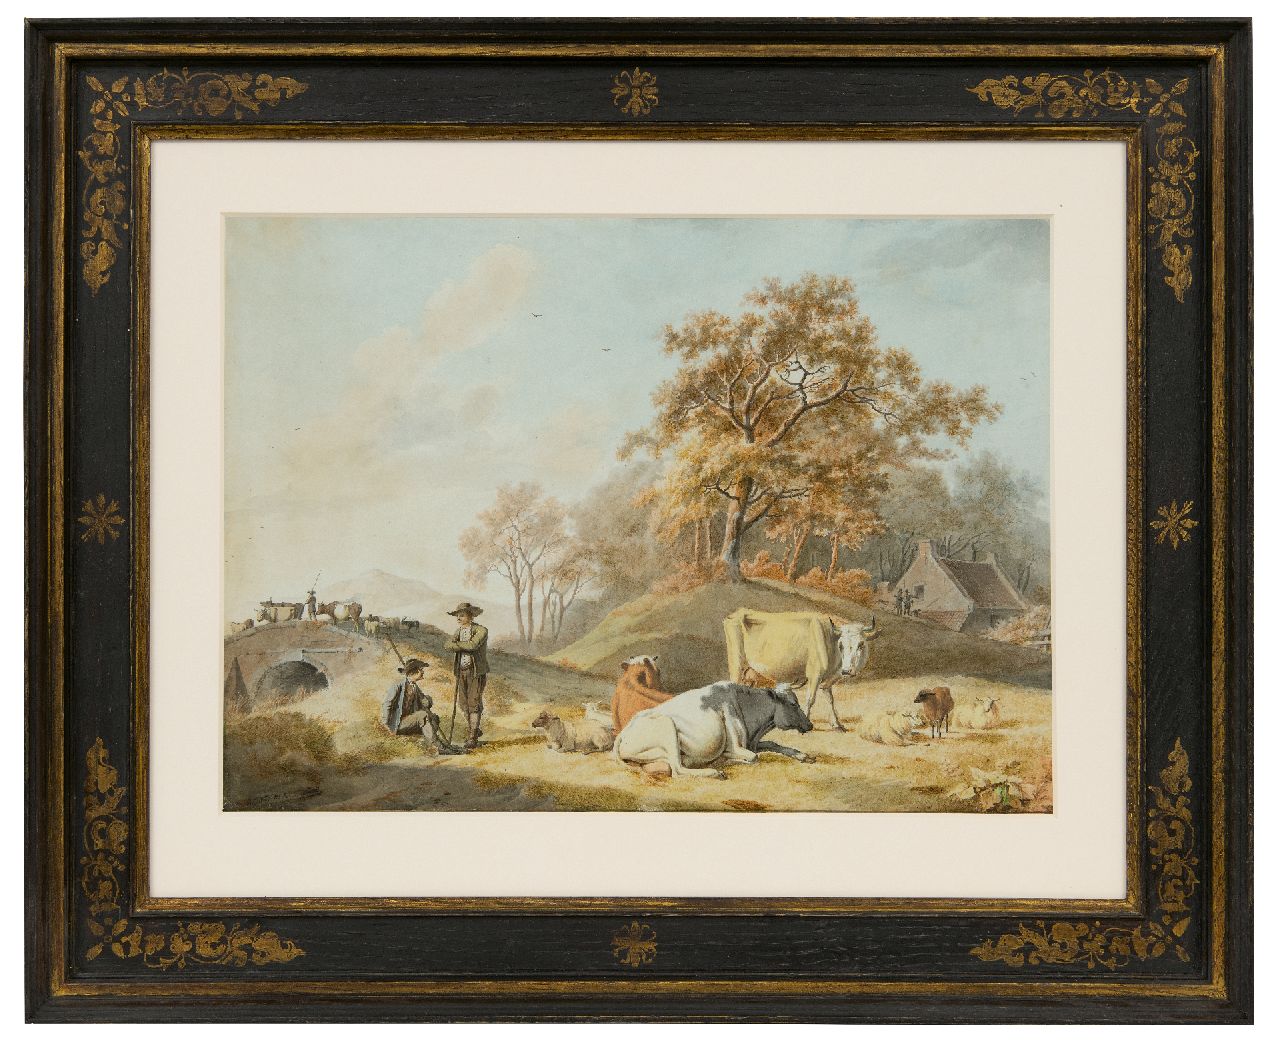 Koekkoek B.C.  | Barend Cornelis Koekkoek | Watercolours and drawings offered for sale | Arcadian landscape with shepherds and cattle, ink and watercolour on paper 26.7 x 37.5 cm, signed l.l. and executed ca. 1824